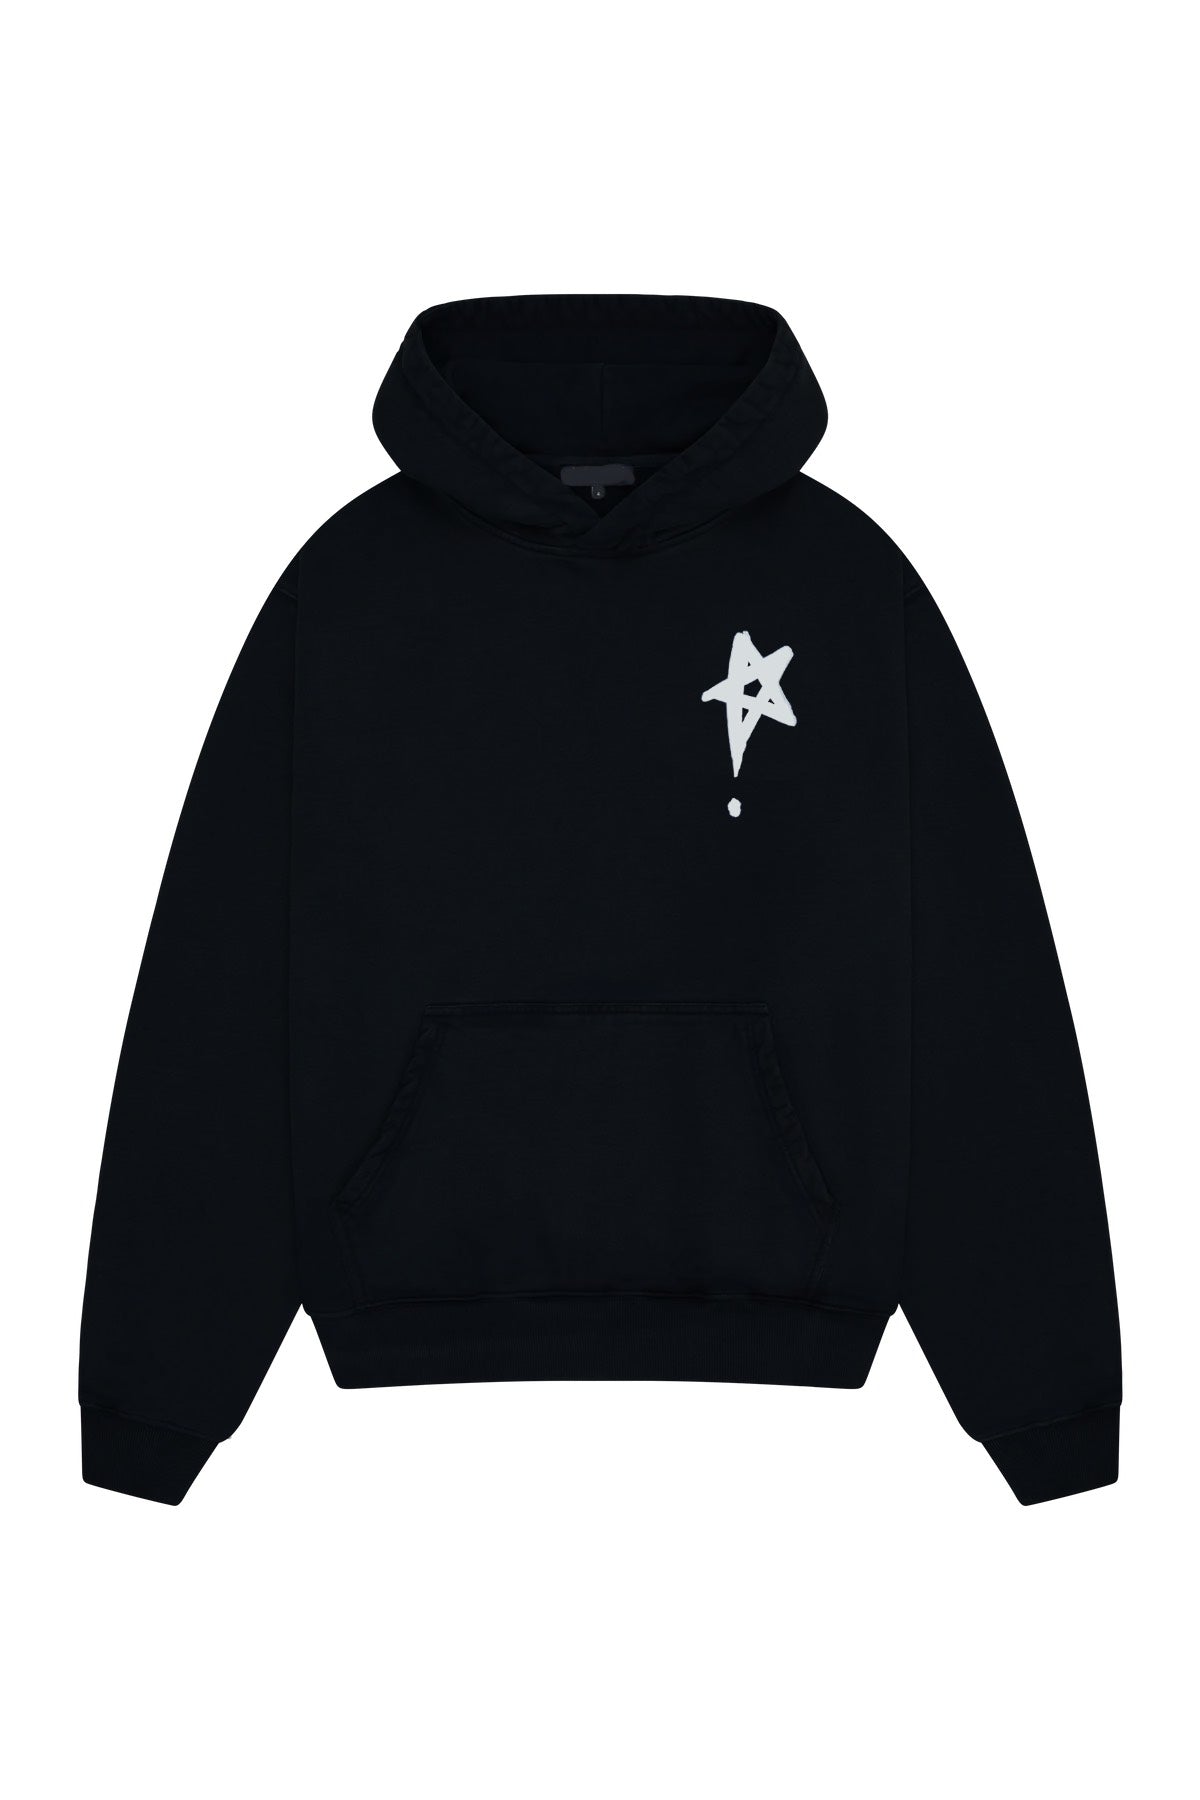 "Think for yourself" Black Hoodie